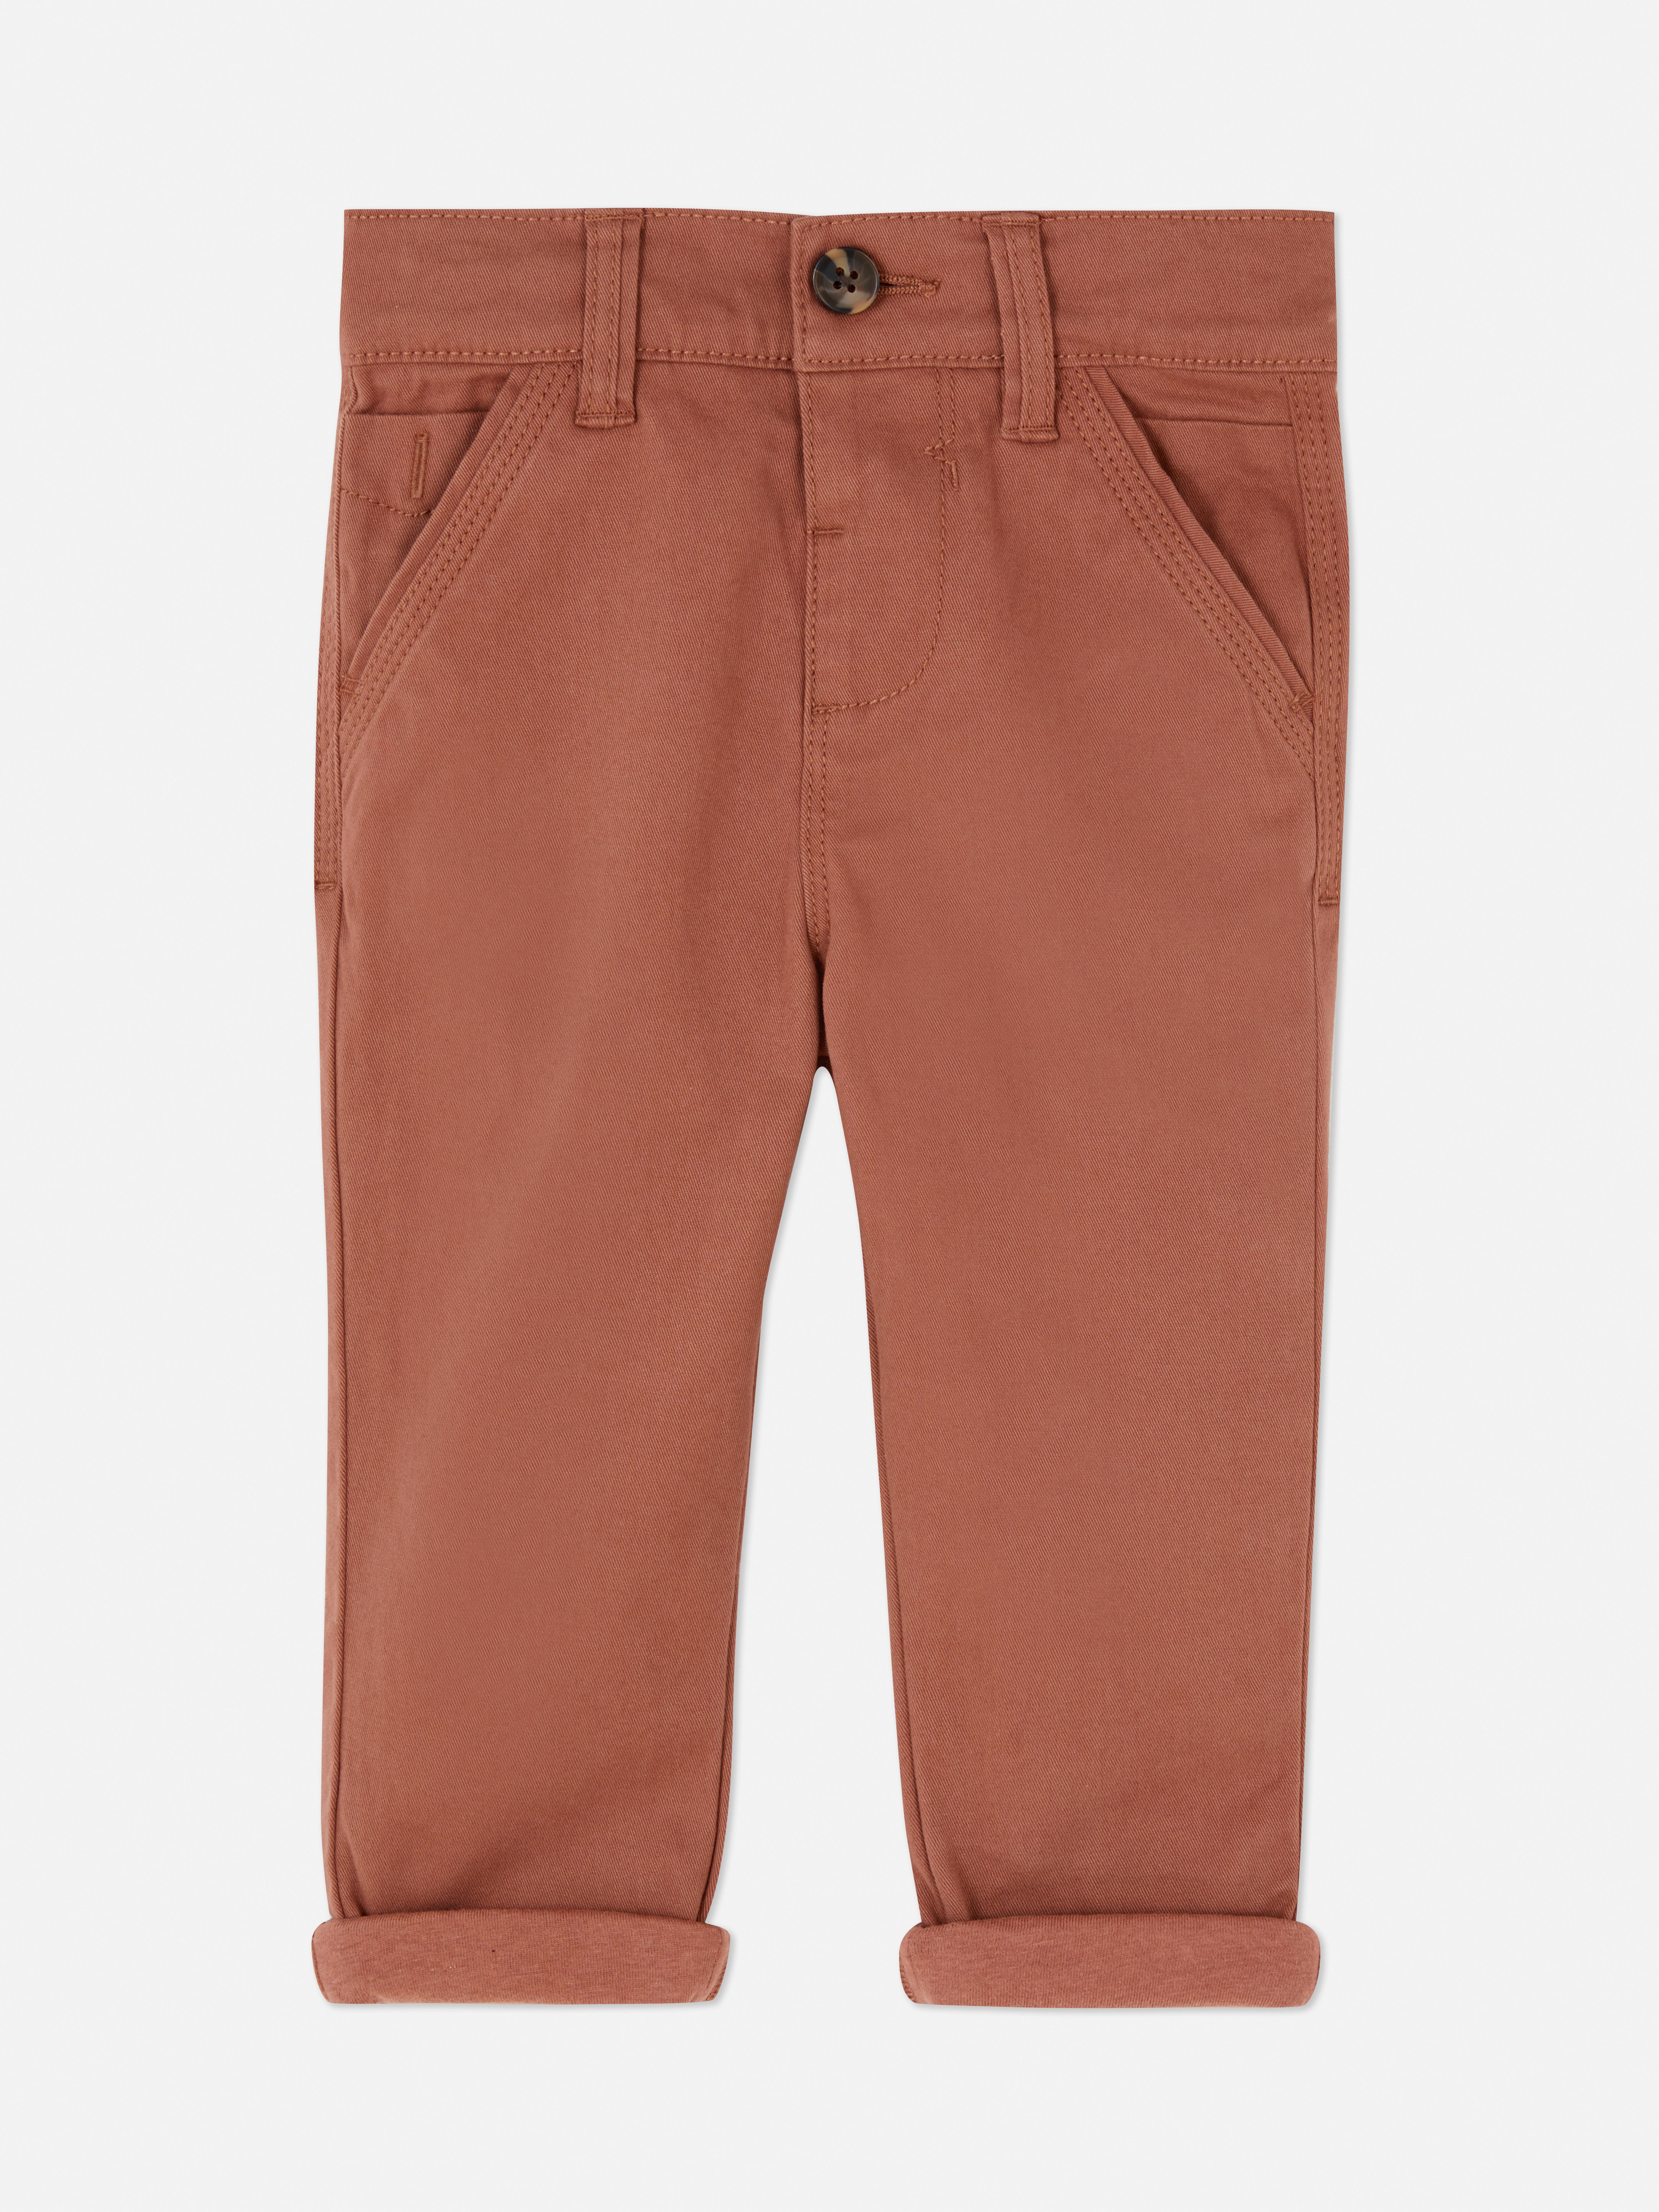 Lined Cotton Chinos